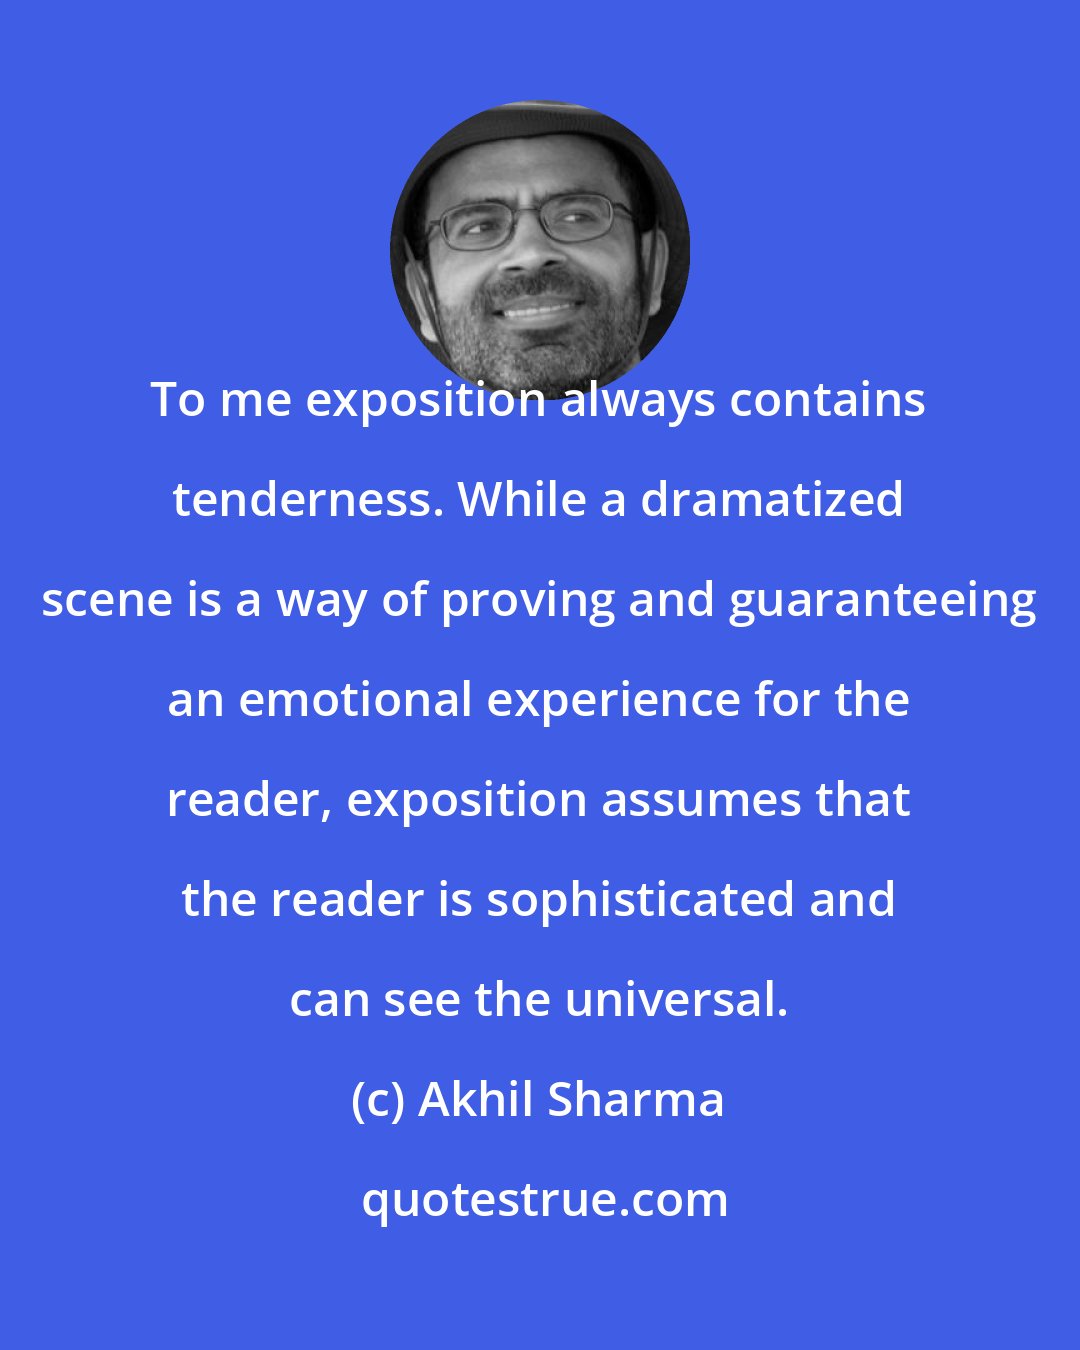 Akhil Sharma: To me exposition always contains tenderness. While a dramatized scene is a way of proving and guaranteeing an emotional experience for the reader, exposition assumes that the reader is sophisticated and can see the universal.